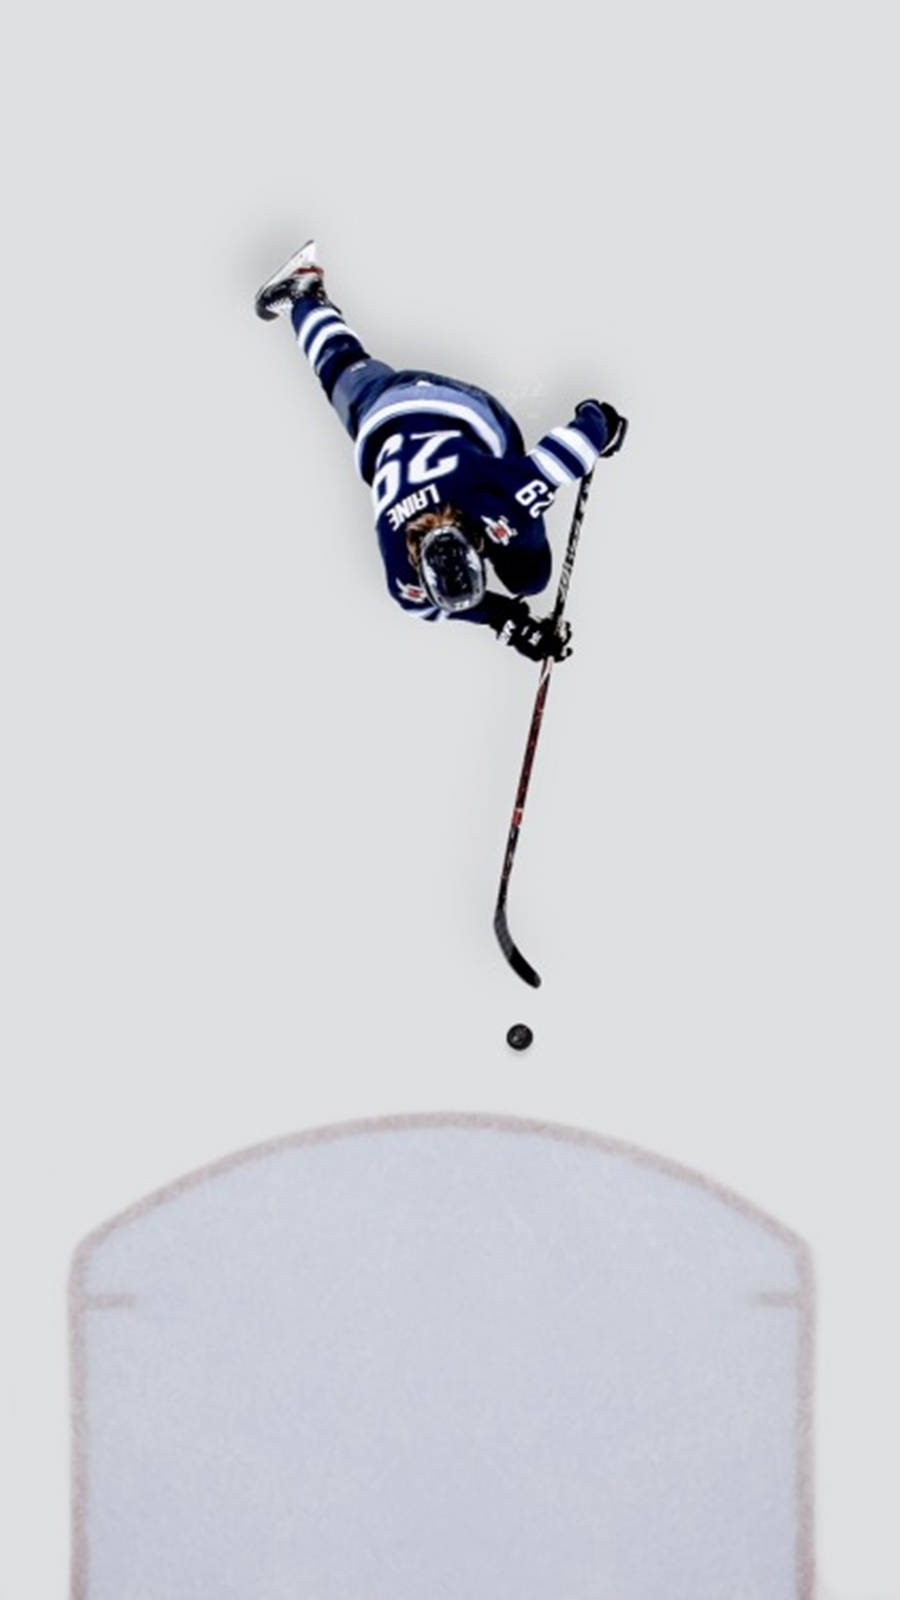 Patrik Laine in Action on the Ice. Wallpaper